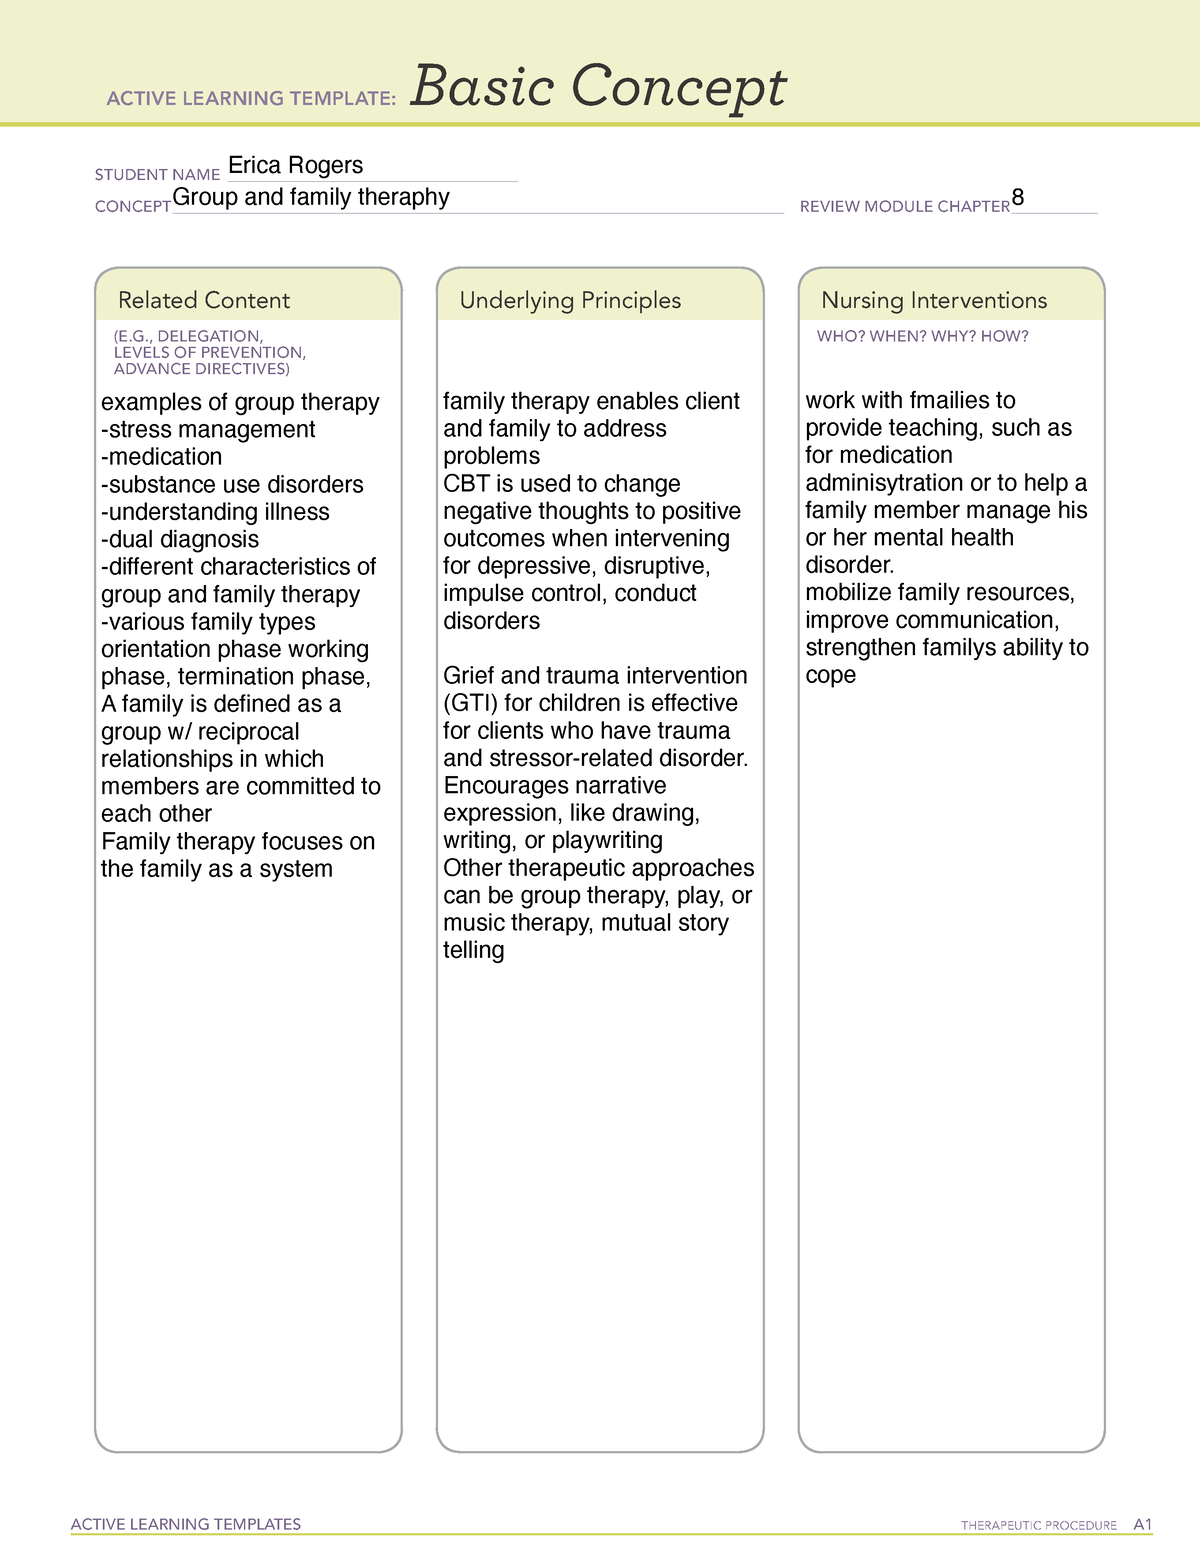 active-learning-template-basic-concept-3-active-learning-templates